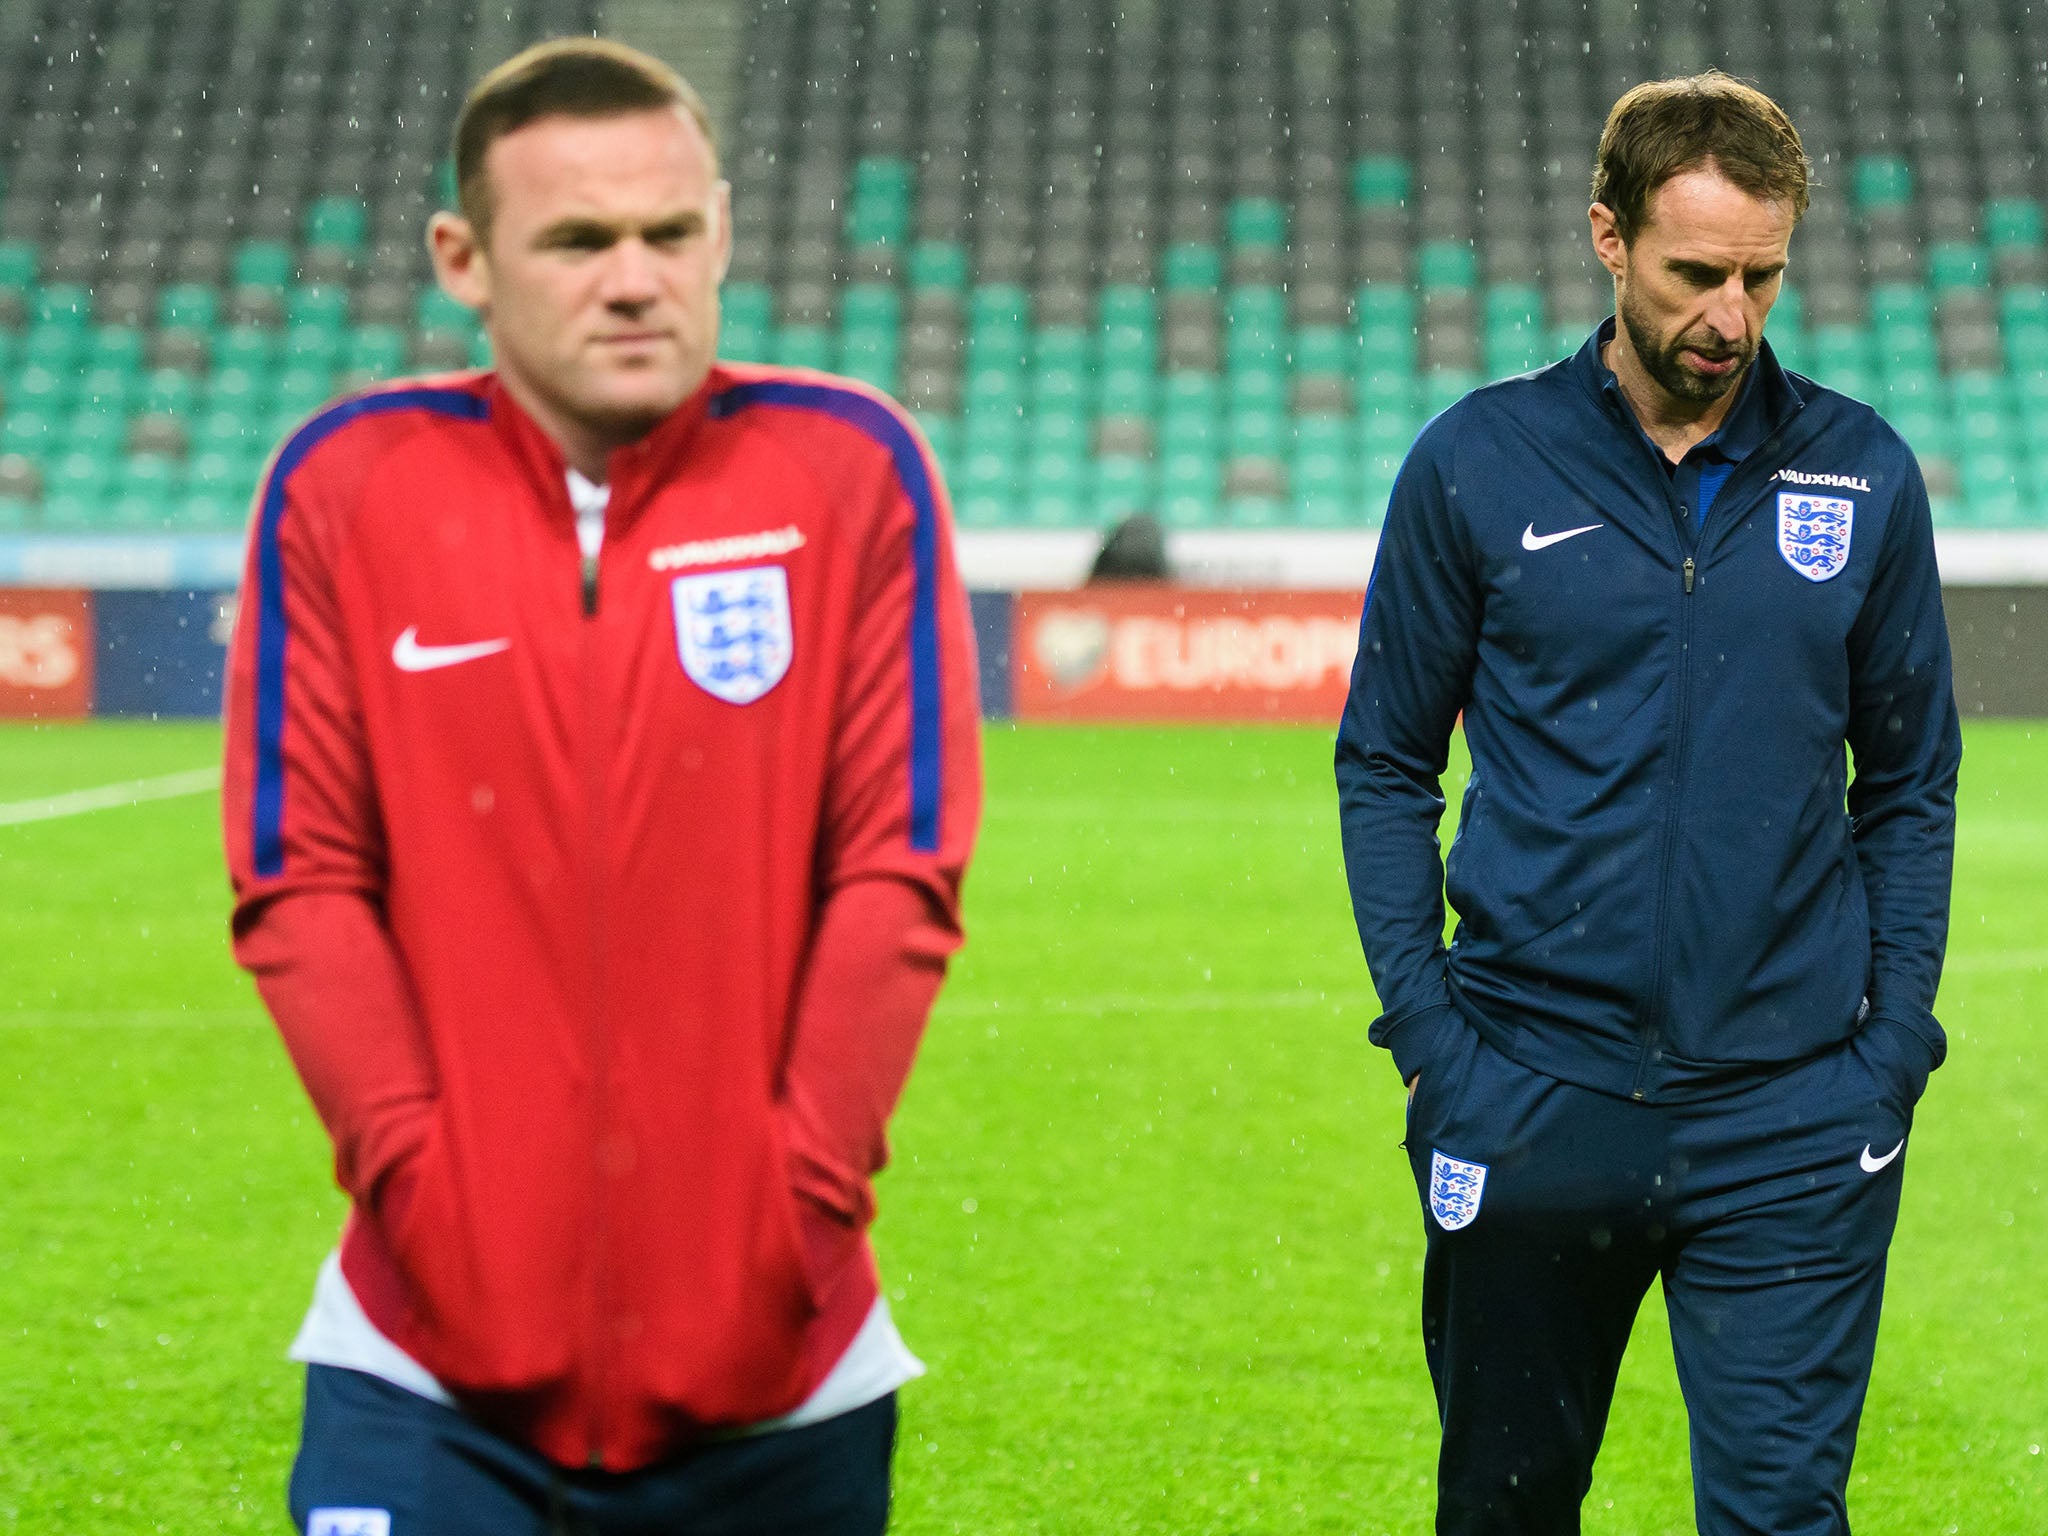 Southgate insisted the door is not closed on Rooney